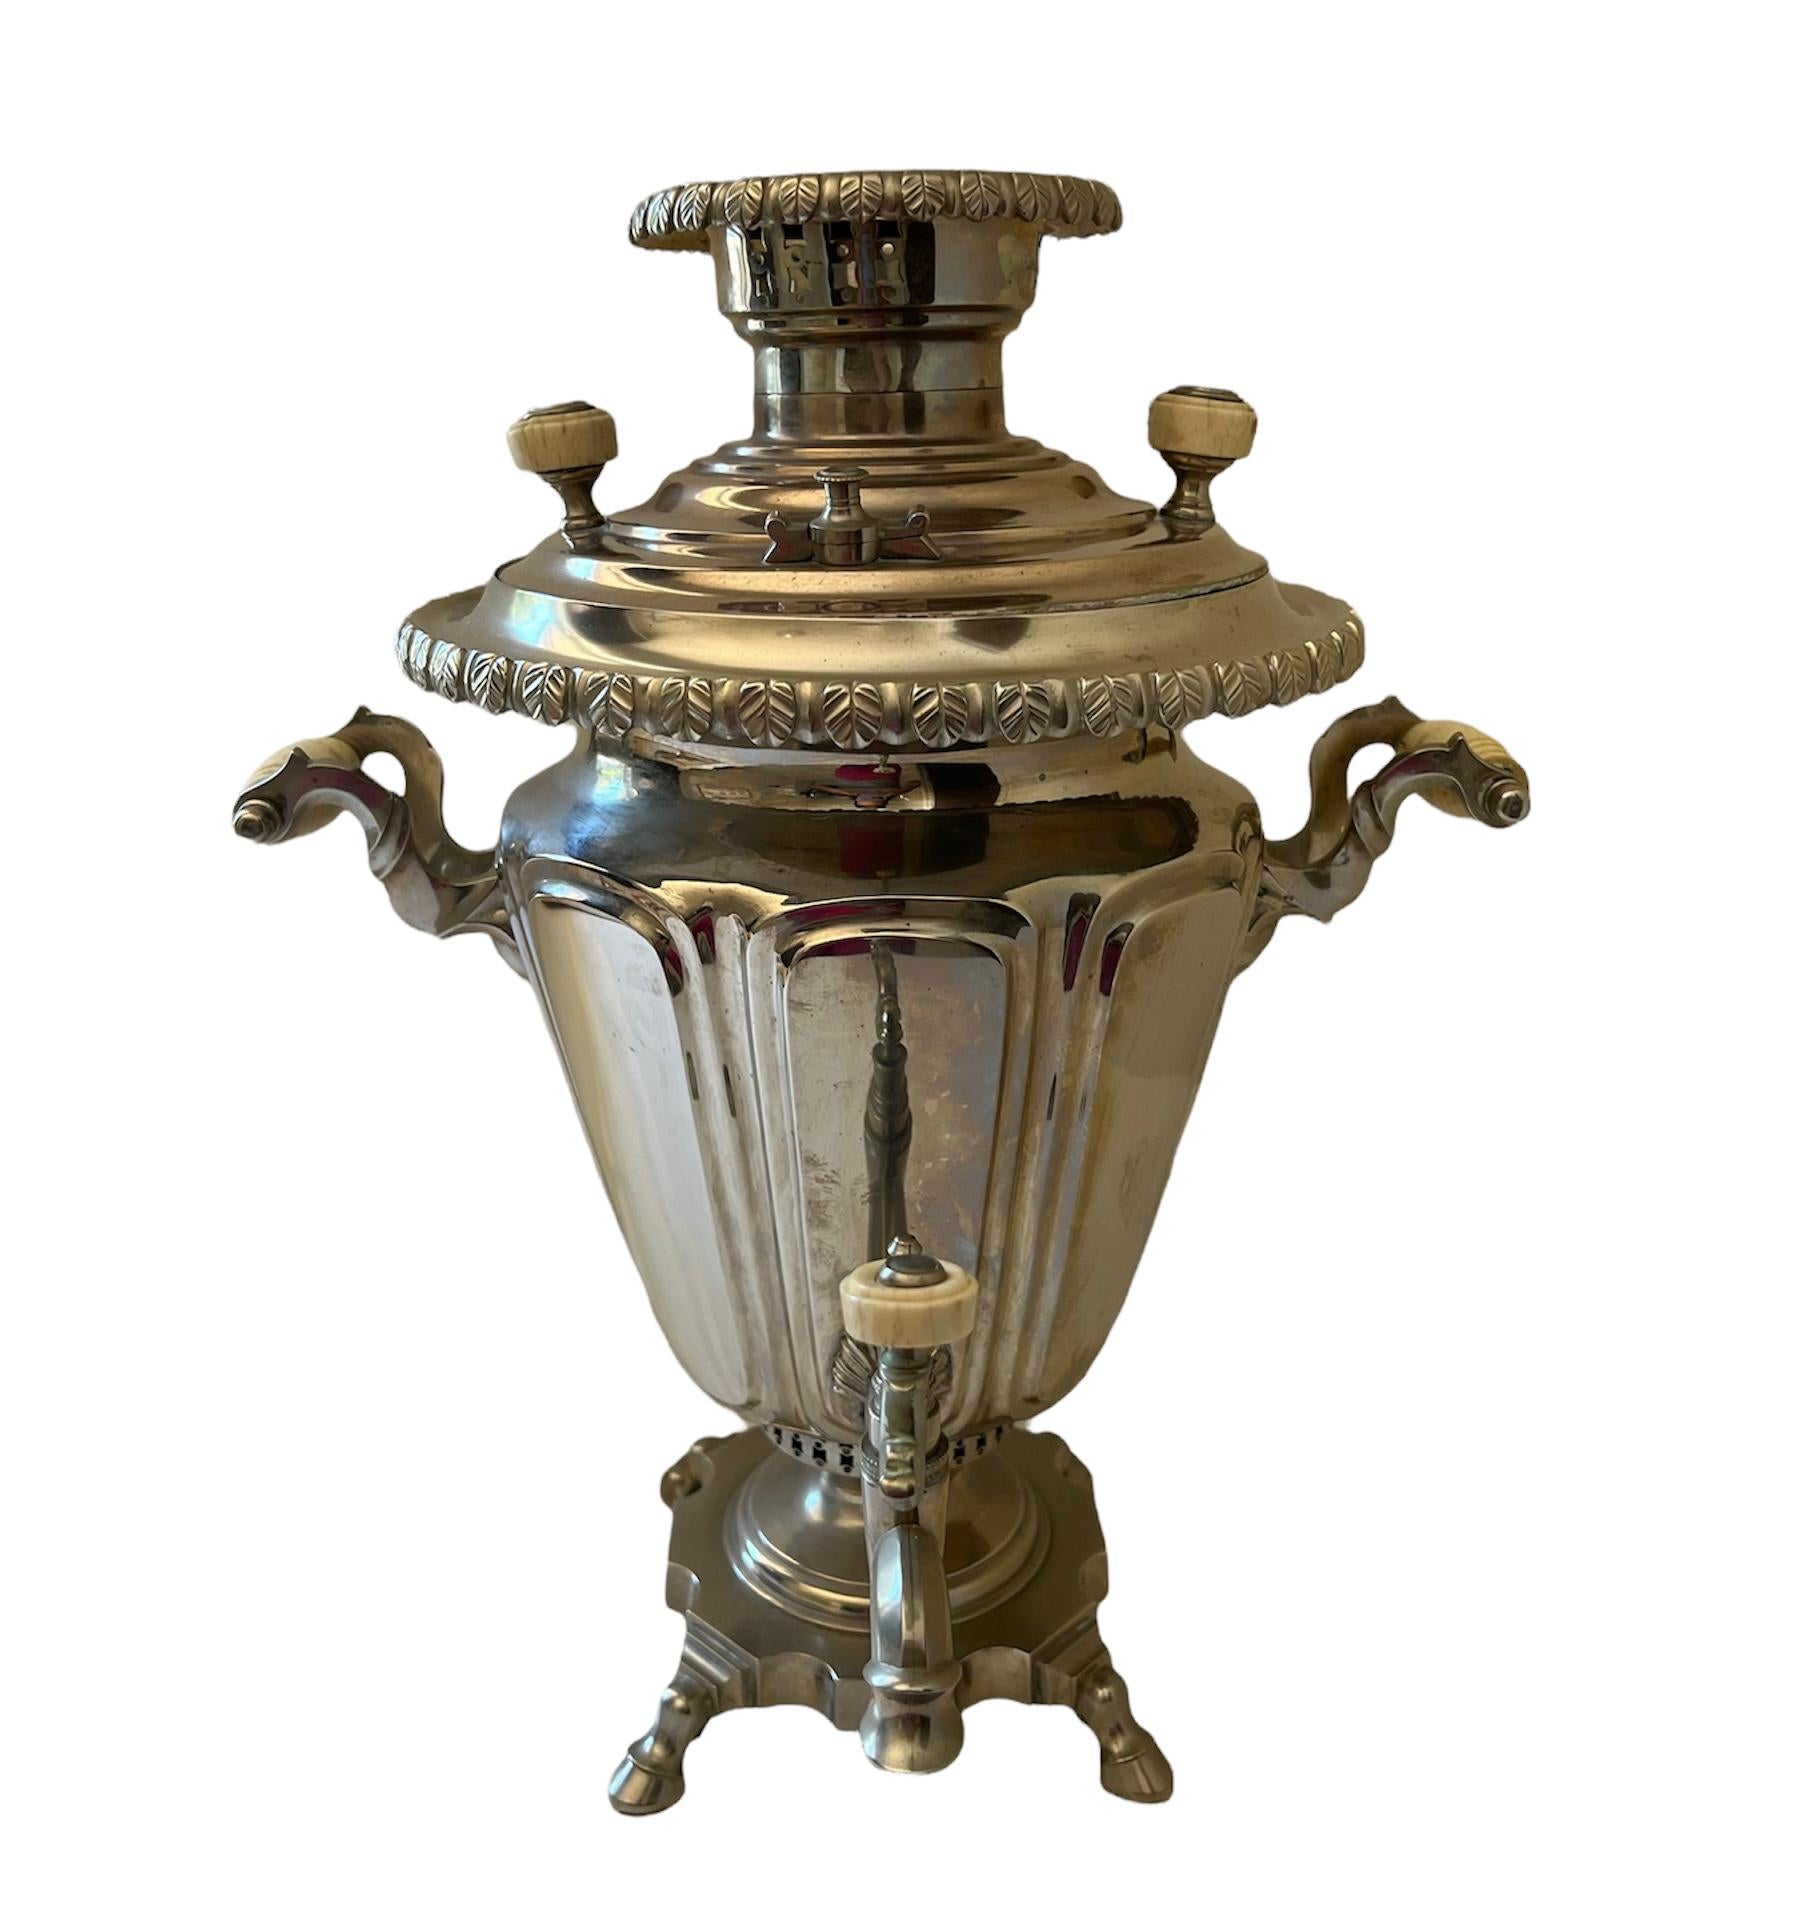 - The set is made out of silver plate with celluloid/ bone details
- The samovar features floral & geometric motifs
- The tray stamped with makers marks that are a little worn off (Зиминъ, Москва, И. Аленчинковъ, Е. Любимовой, 1681 or